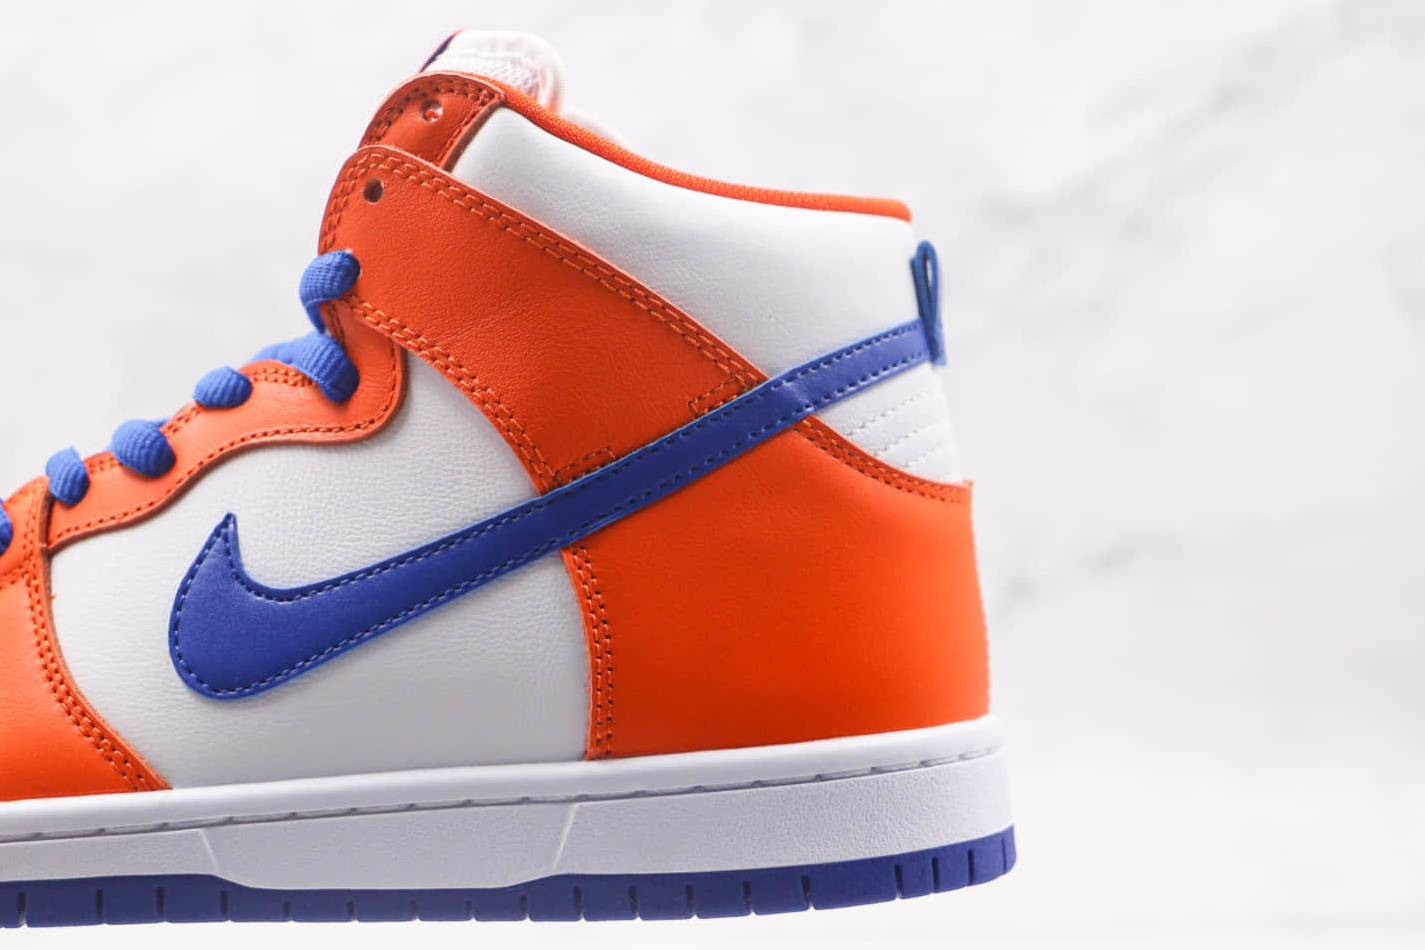 Nike SB Dunk High 'Danny Supa' AH0471-841 - Classic Style and Supreme Comfort in Every Step